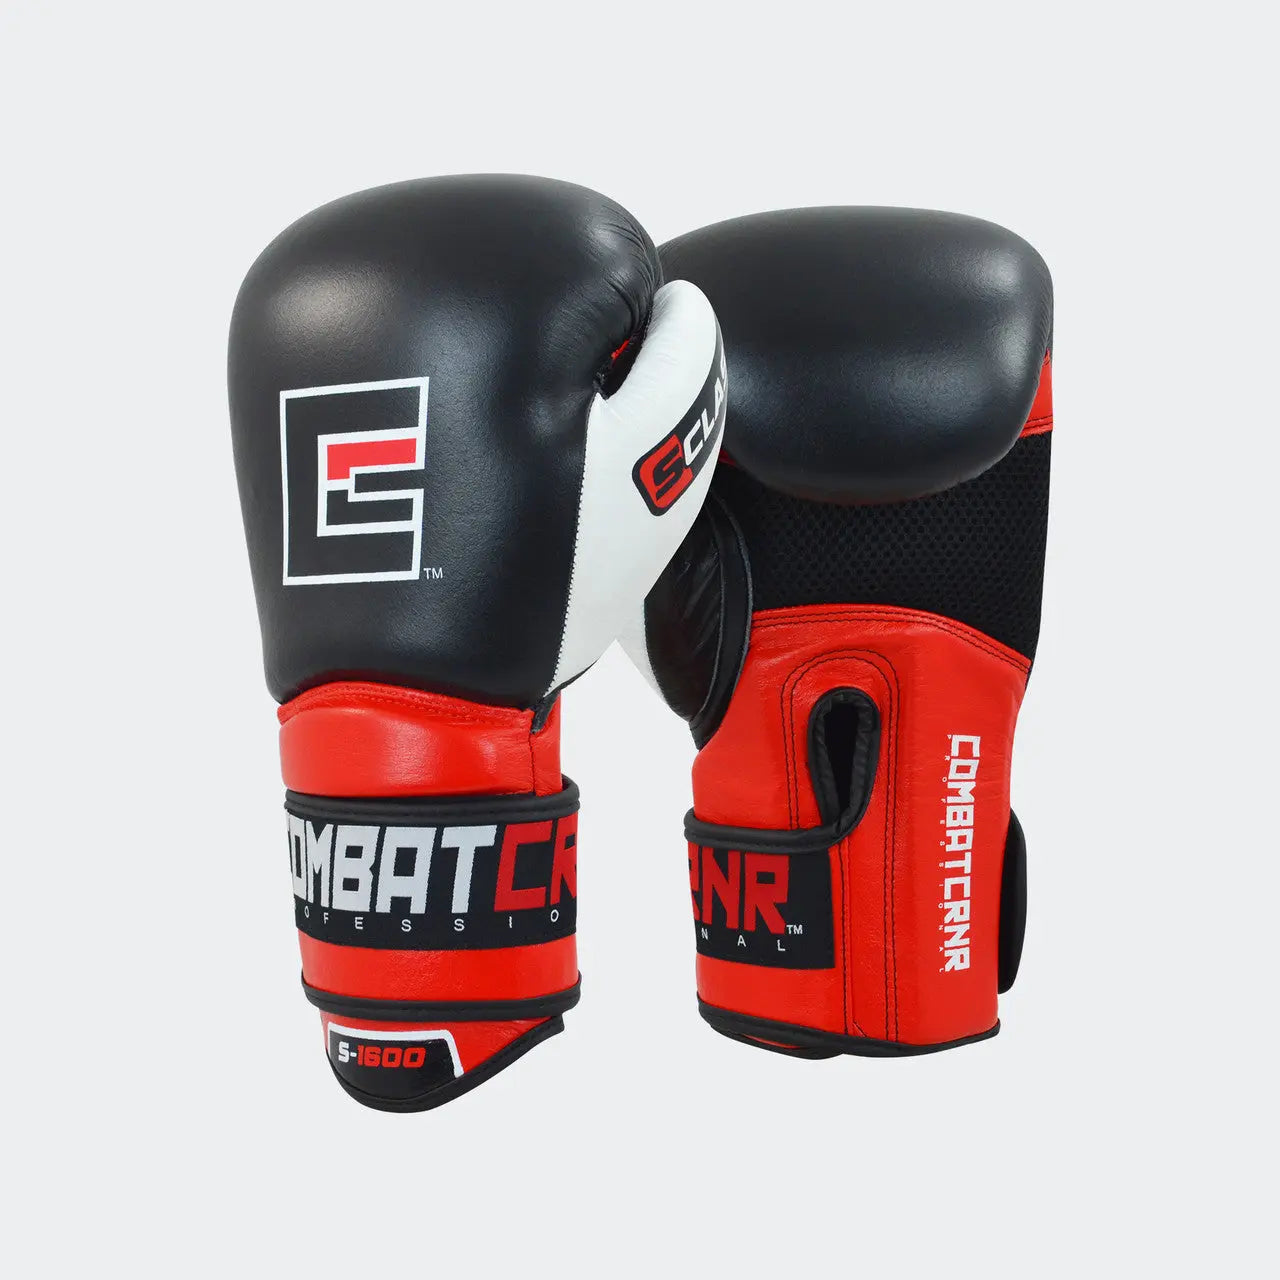 S-CLASS BOXING GLOVES - Prime Combats